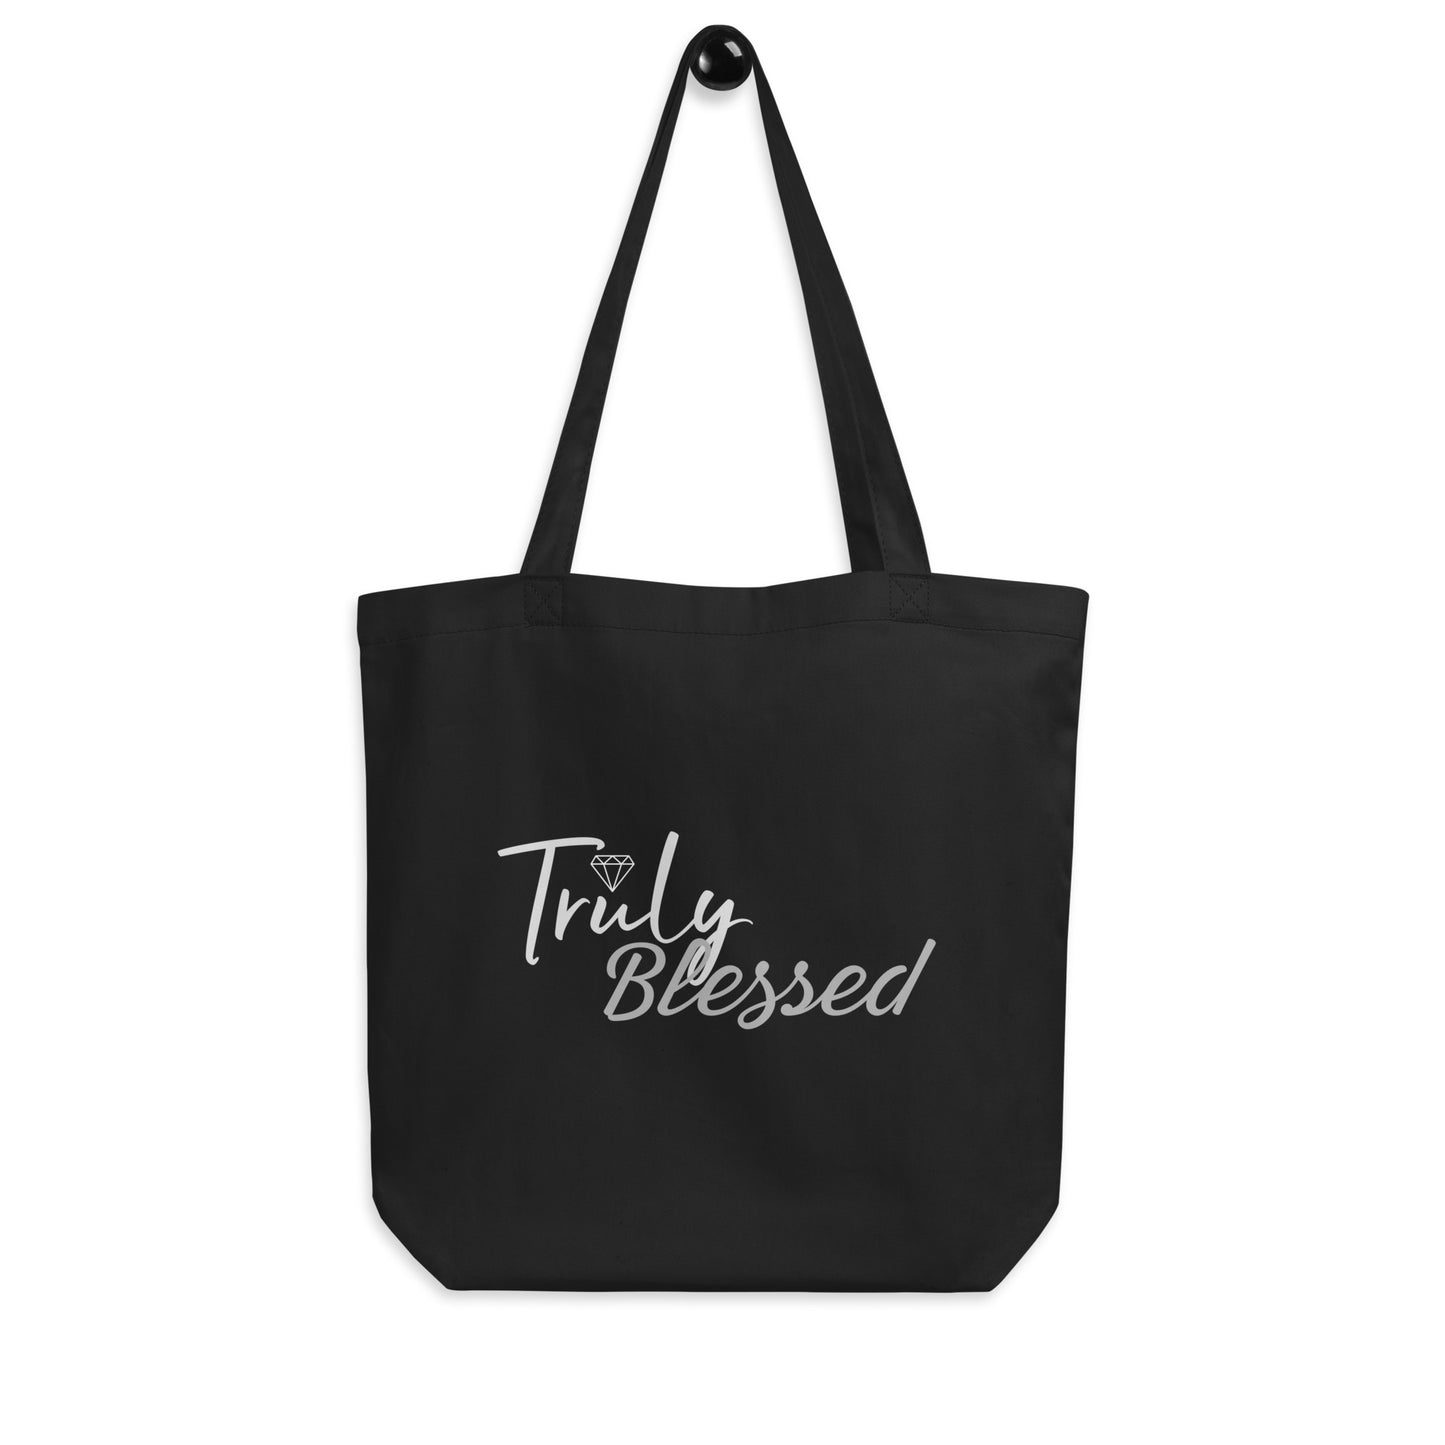 TRULY BLESSED Eco Tote Bag